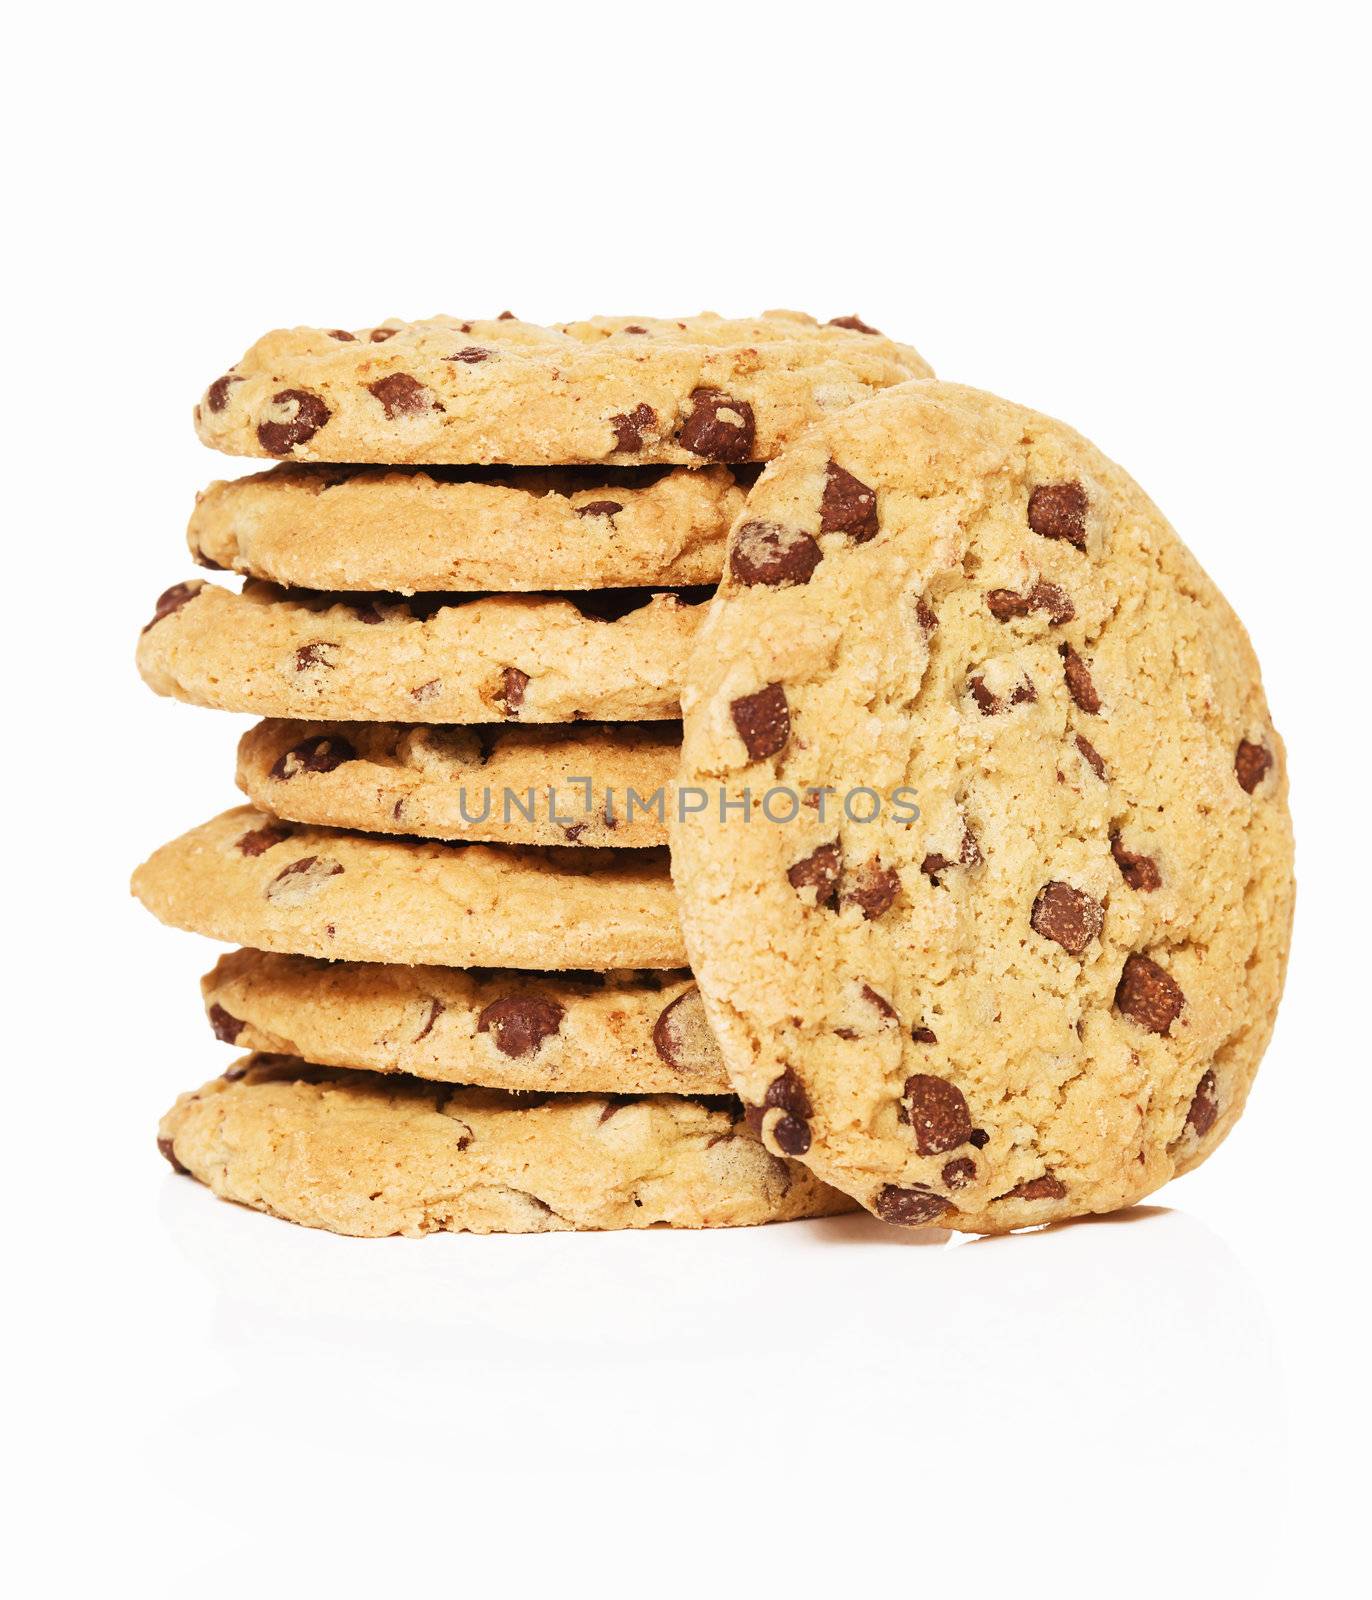 stapled cookies with a standing cookie on white background